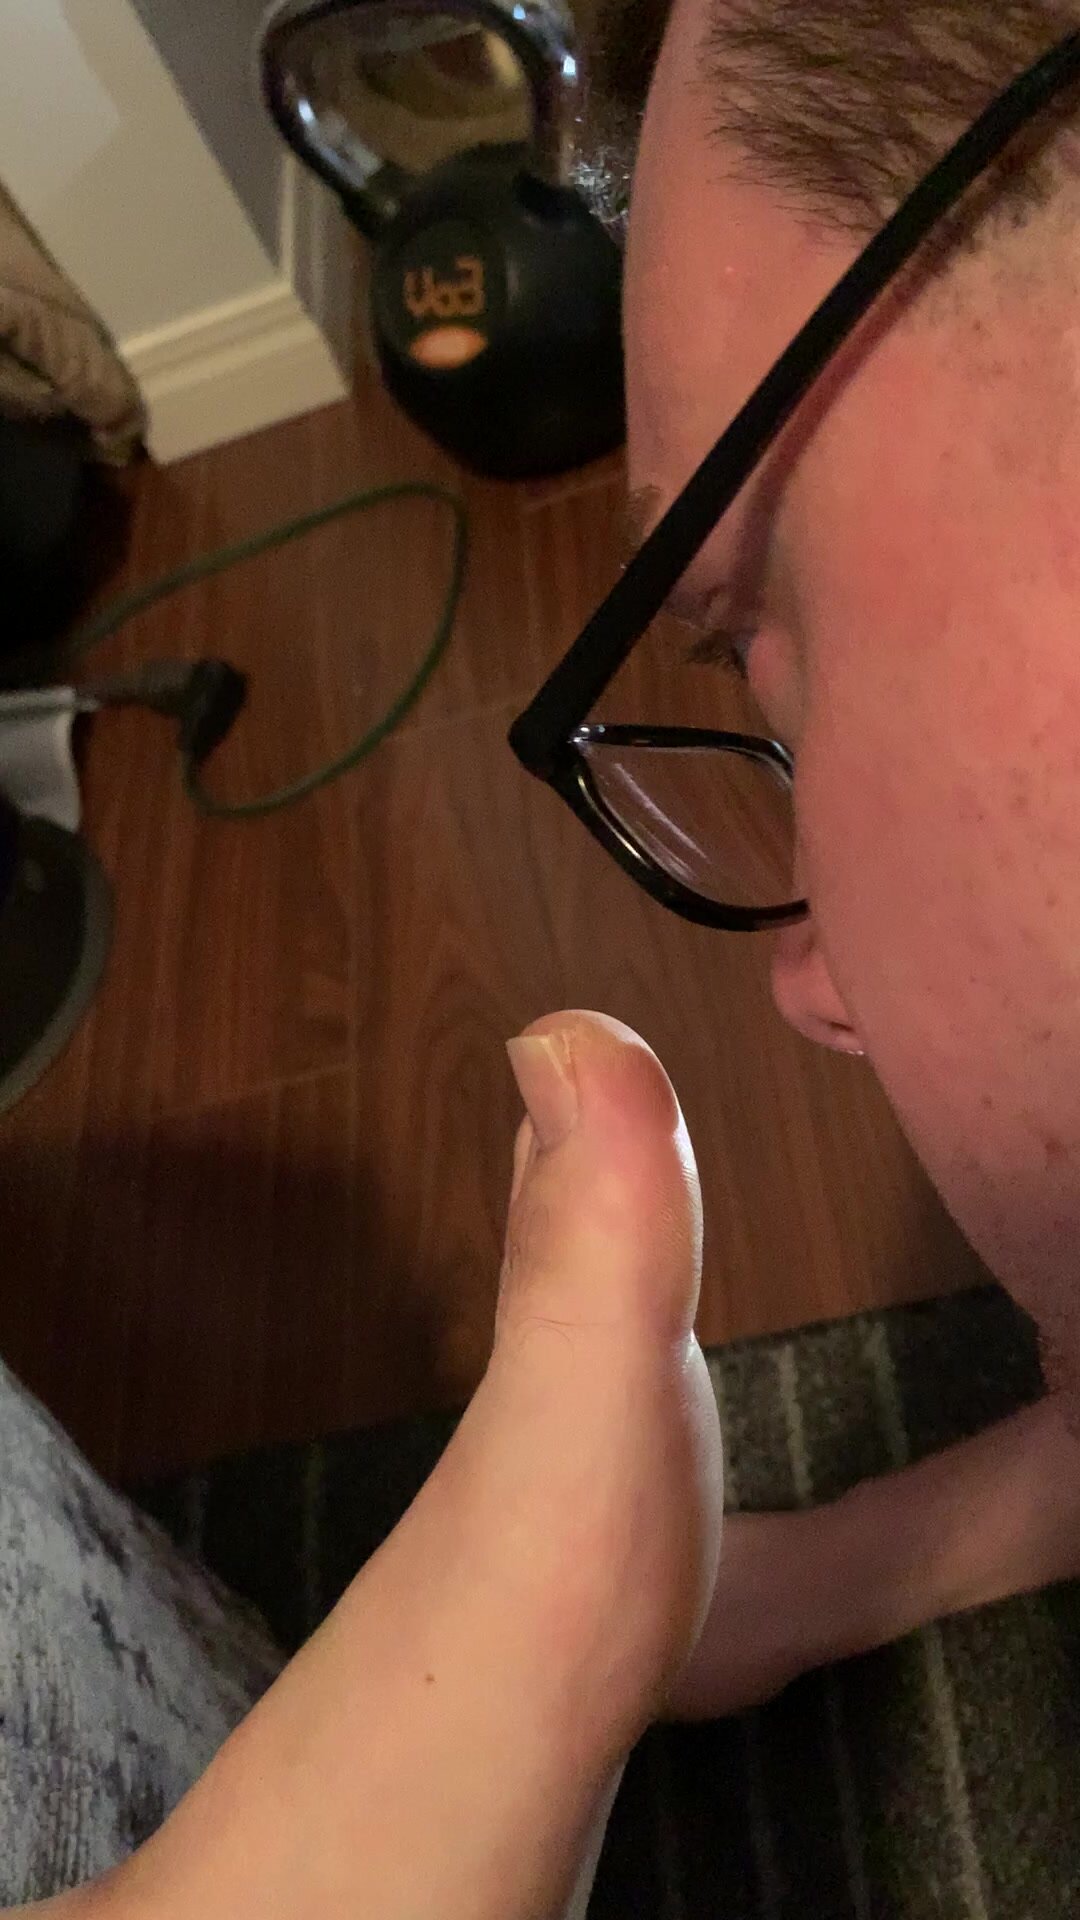 Stinky Alpha Feet for Sub to Sniff